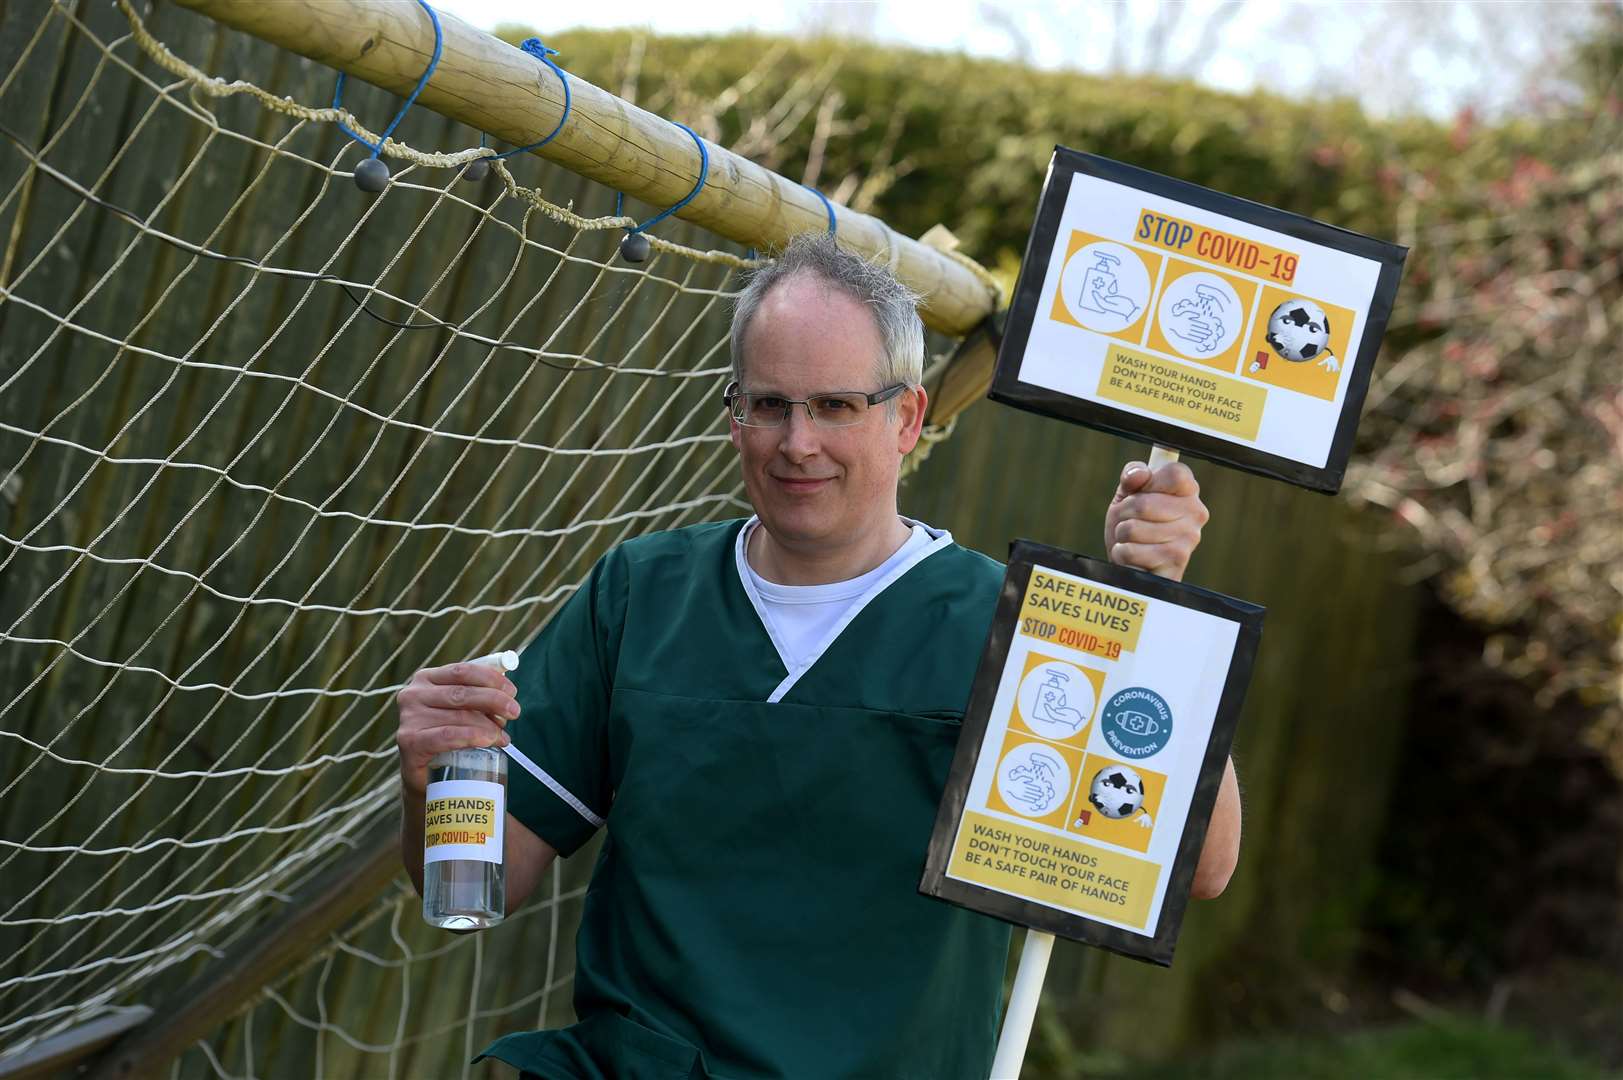 Dr Ross Jaffrey launched the Safe Hands, Saves Lives campaign almost a year ago and has been keeping a close eye on the situation ever since. Picture: Callum Mackay